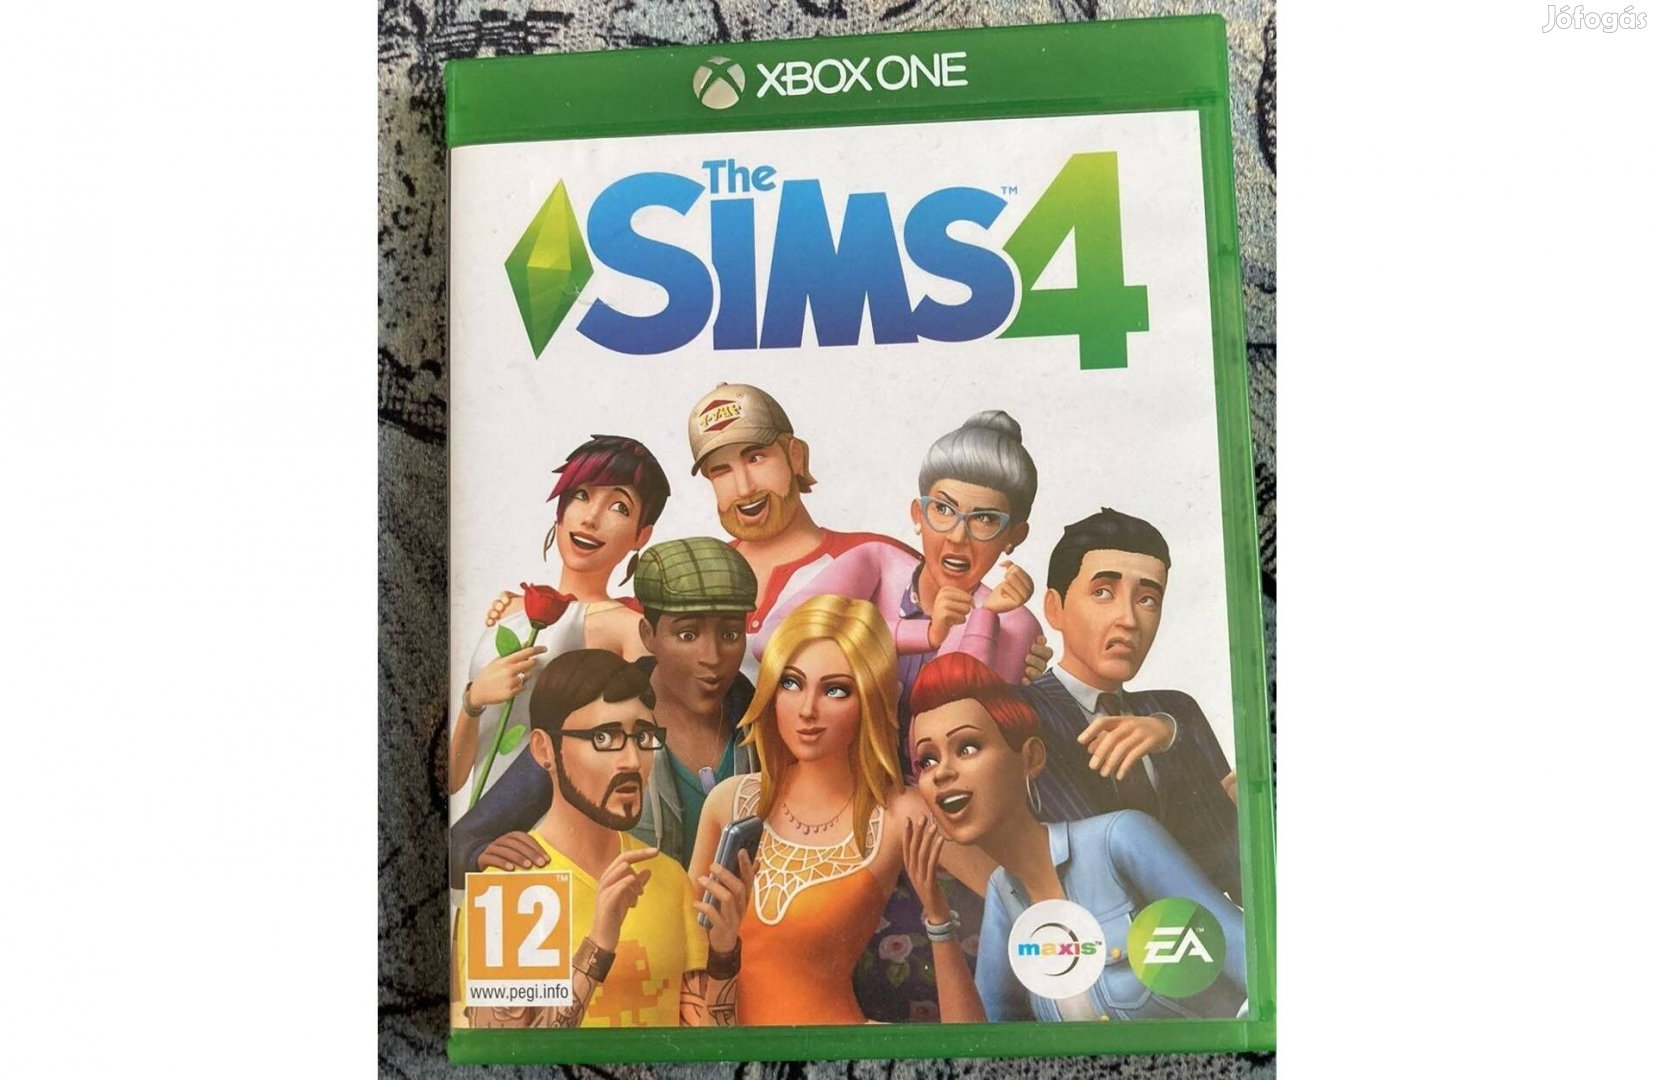 Xbox ONE - The Sims 4